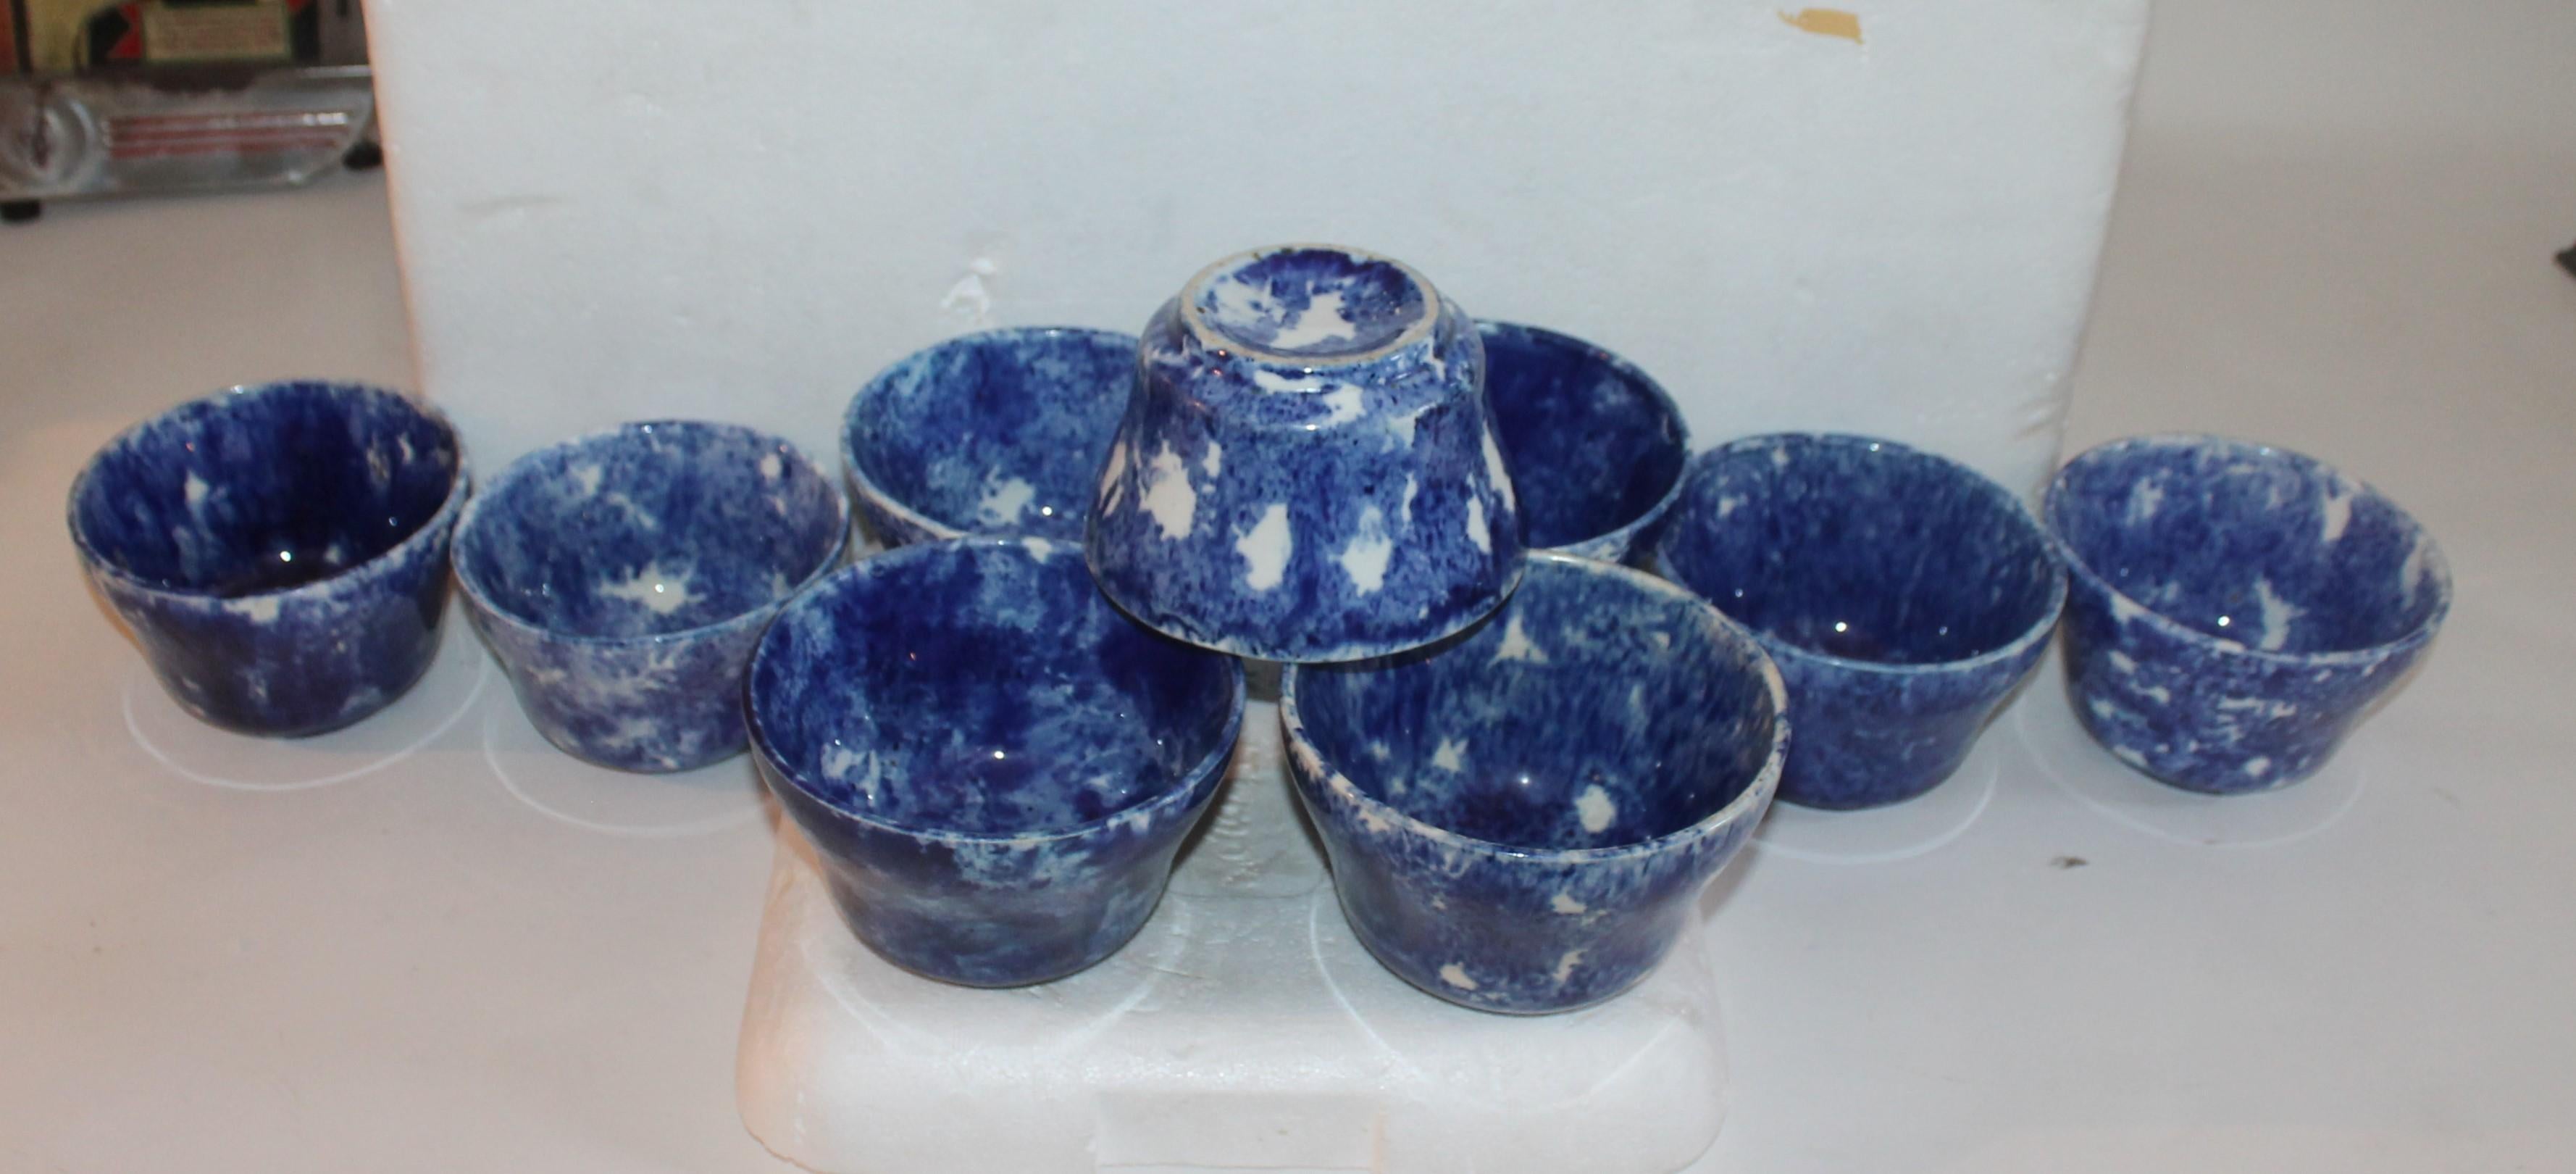 19th Century Rare Collection of 20 Sponge Ware Waste Bowls